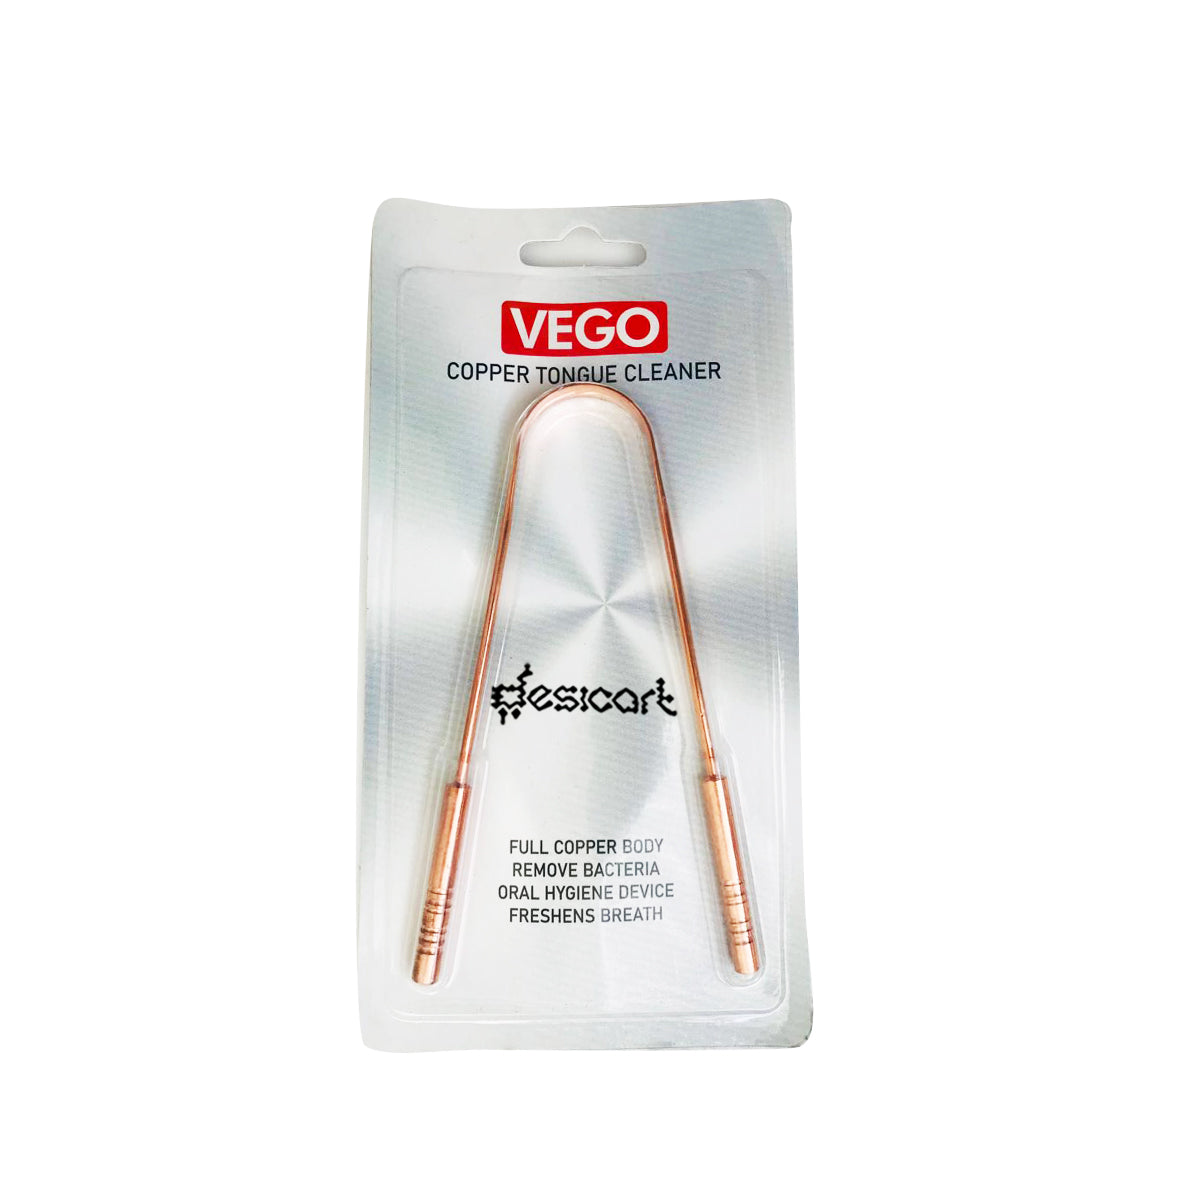 Vego Copper Tongue Cleaner